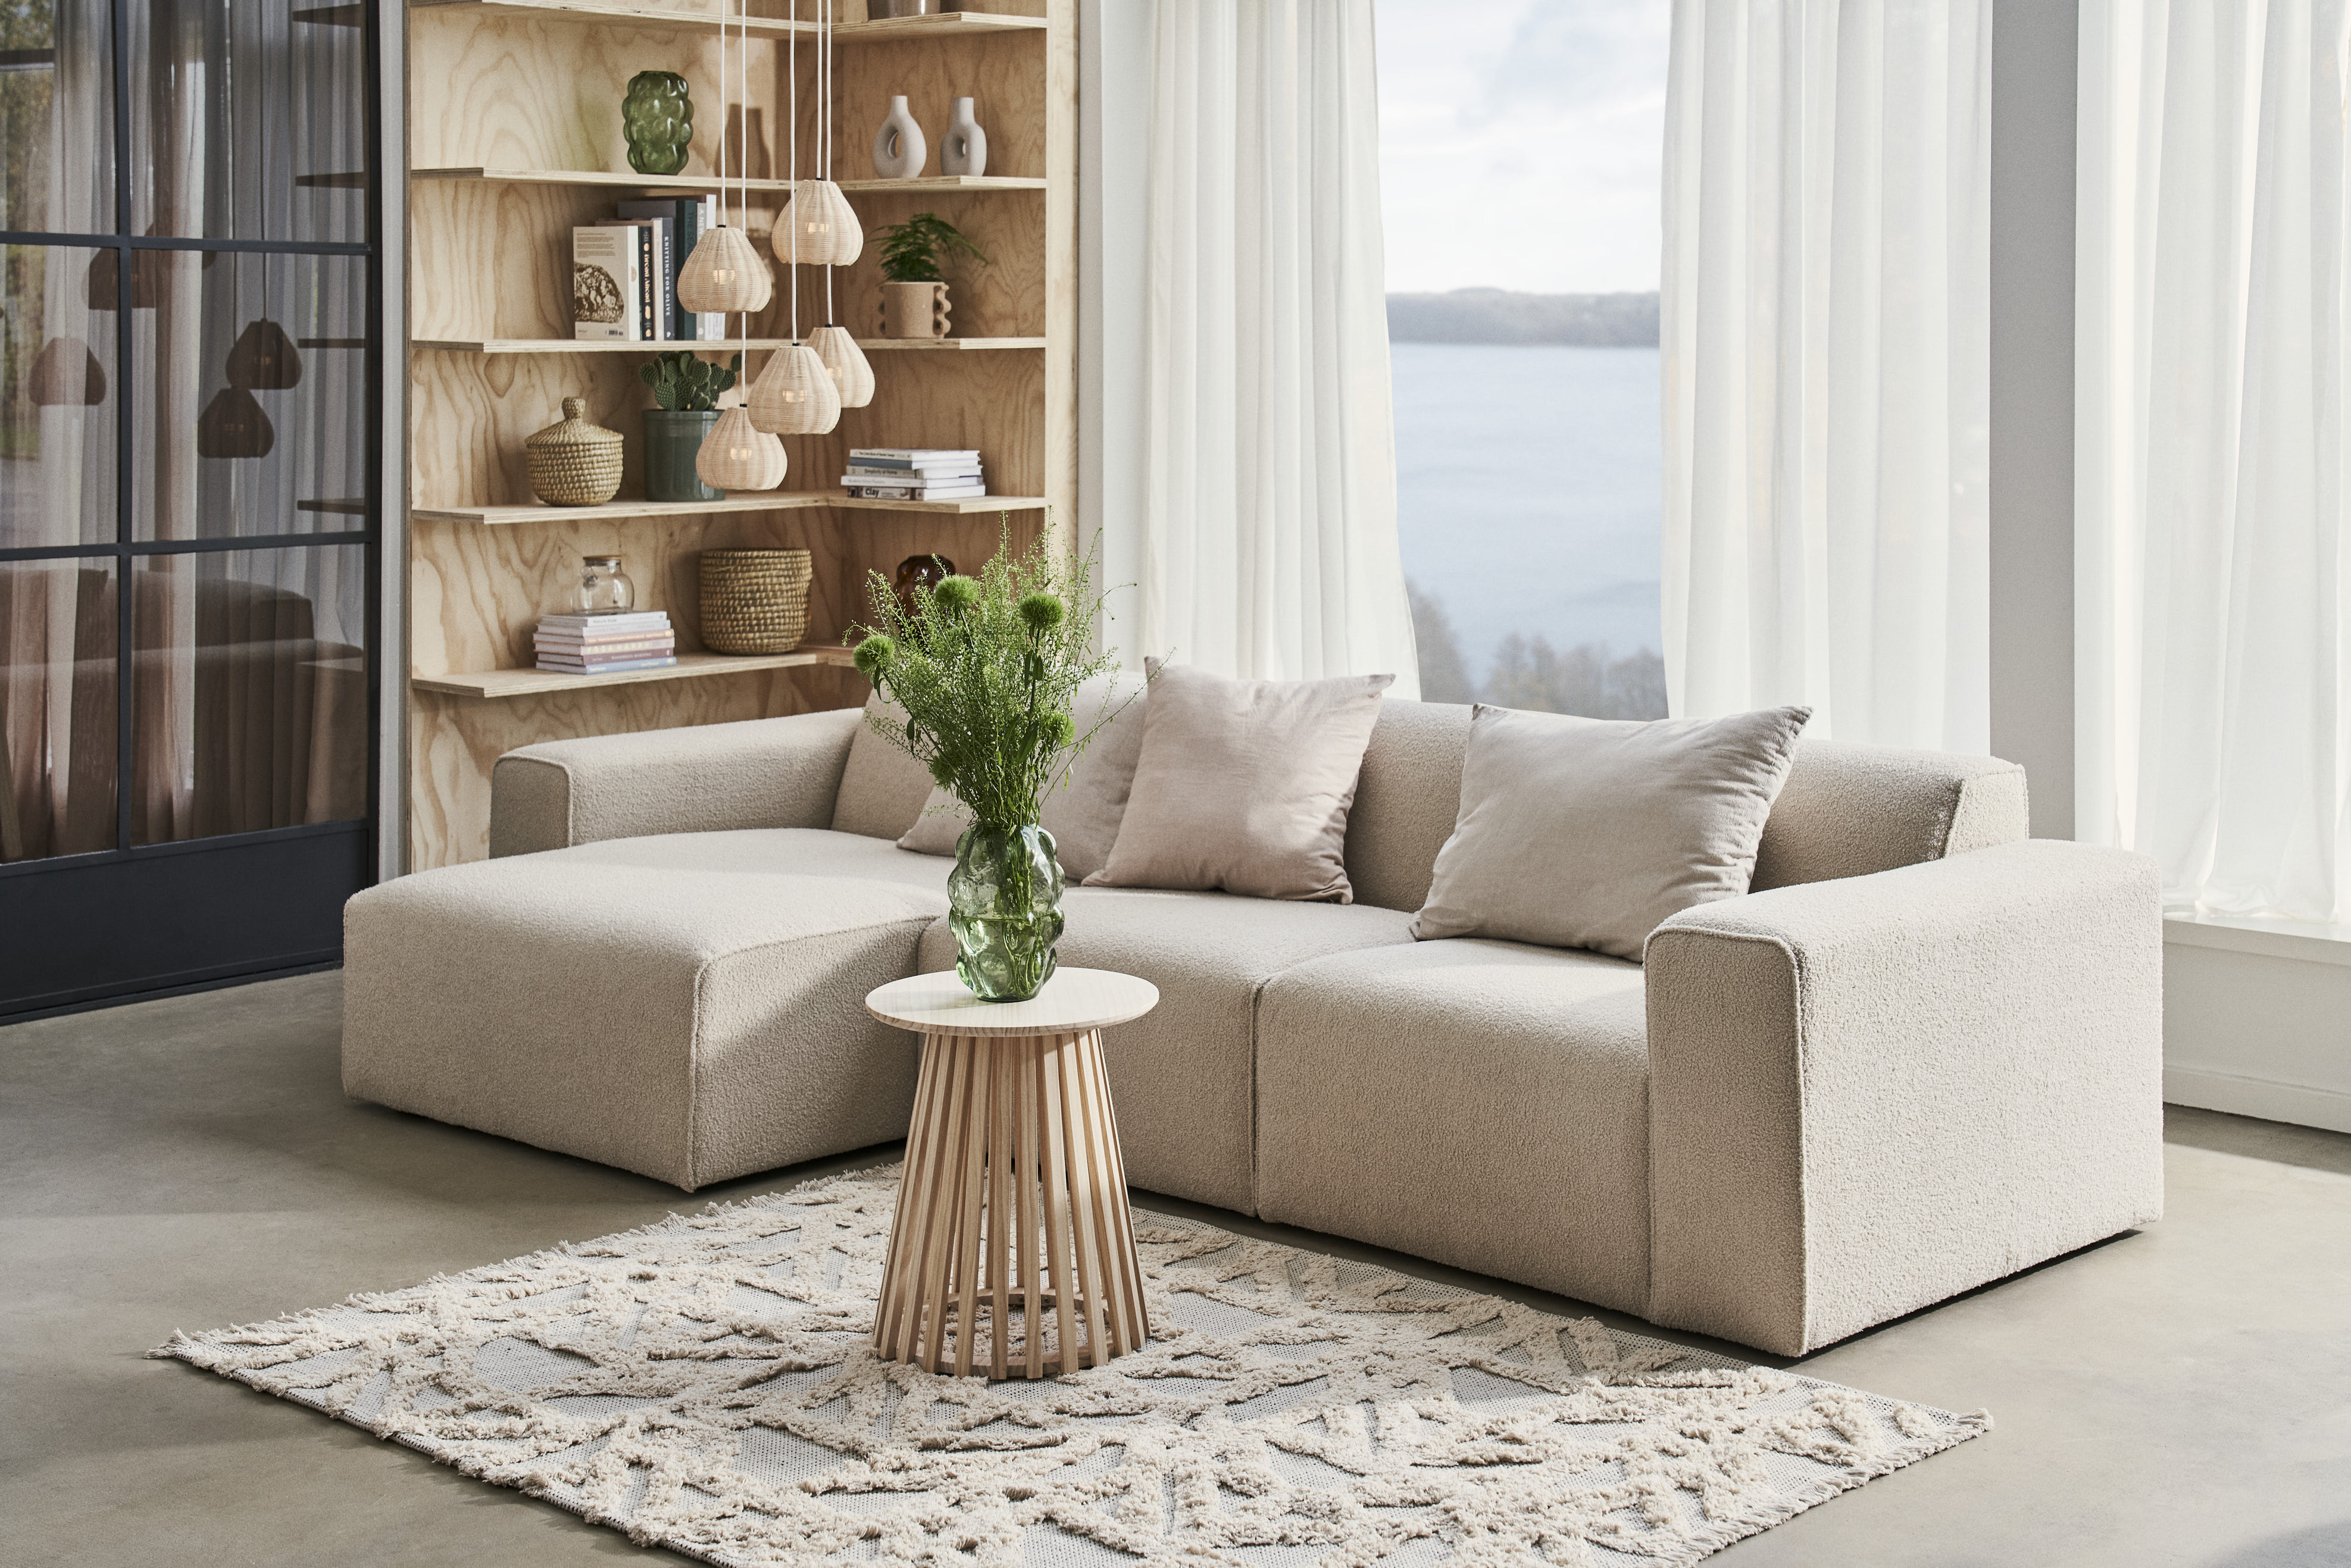 GET THAT LUXURIOUS HOTEL-FEELING AT HOME WITH SØSTRENE GRENE’S NEW COLLECTION